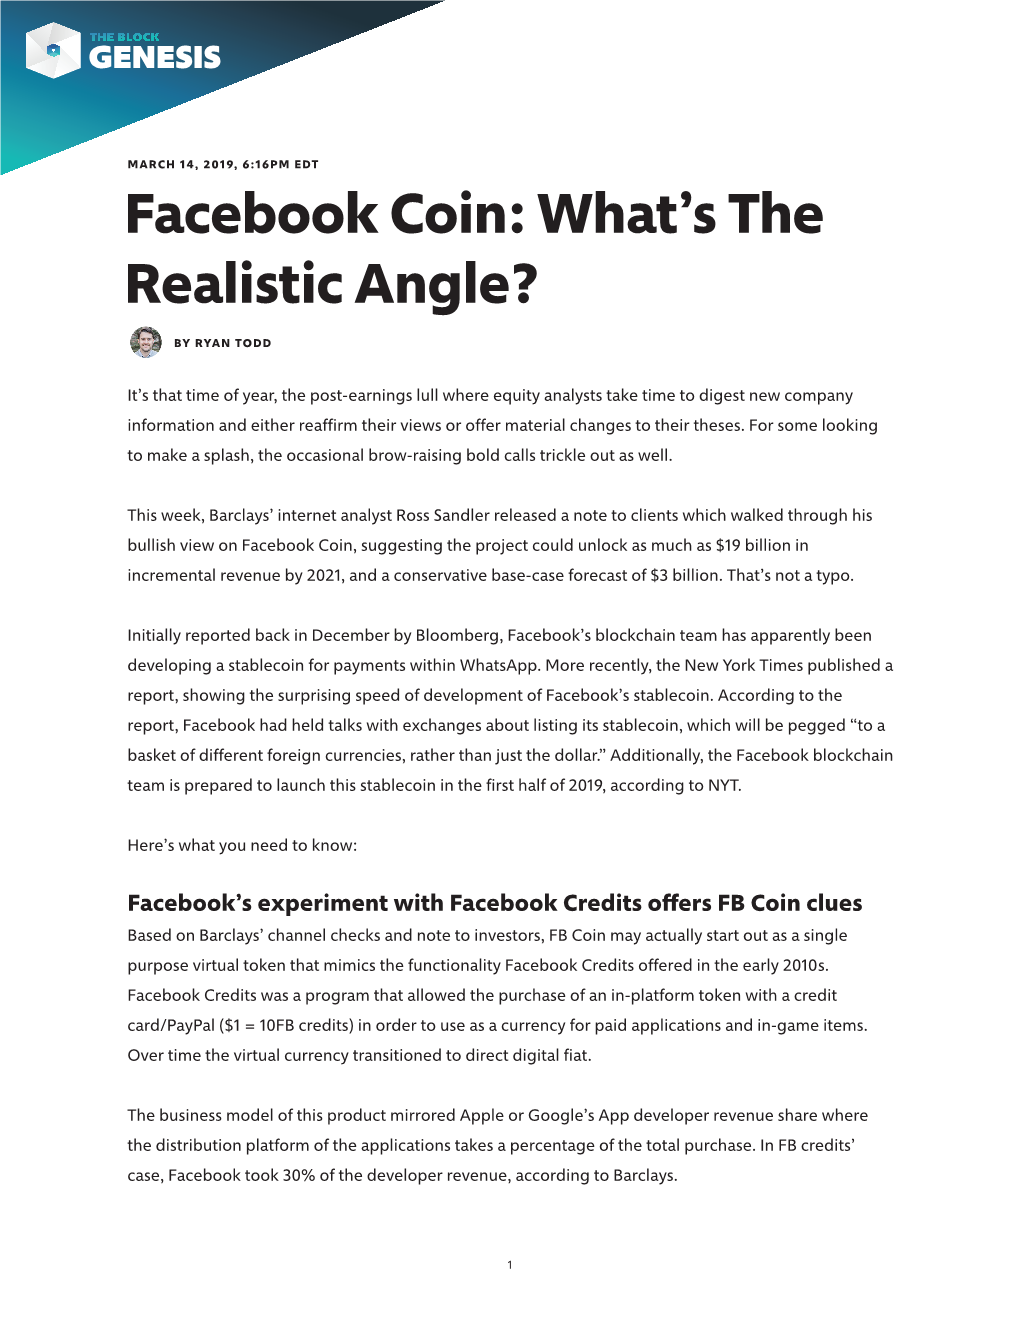 Facebook Coin: What's the Realistic Angle?